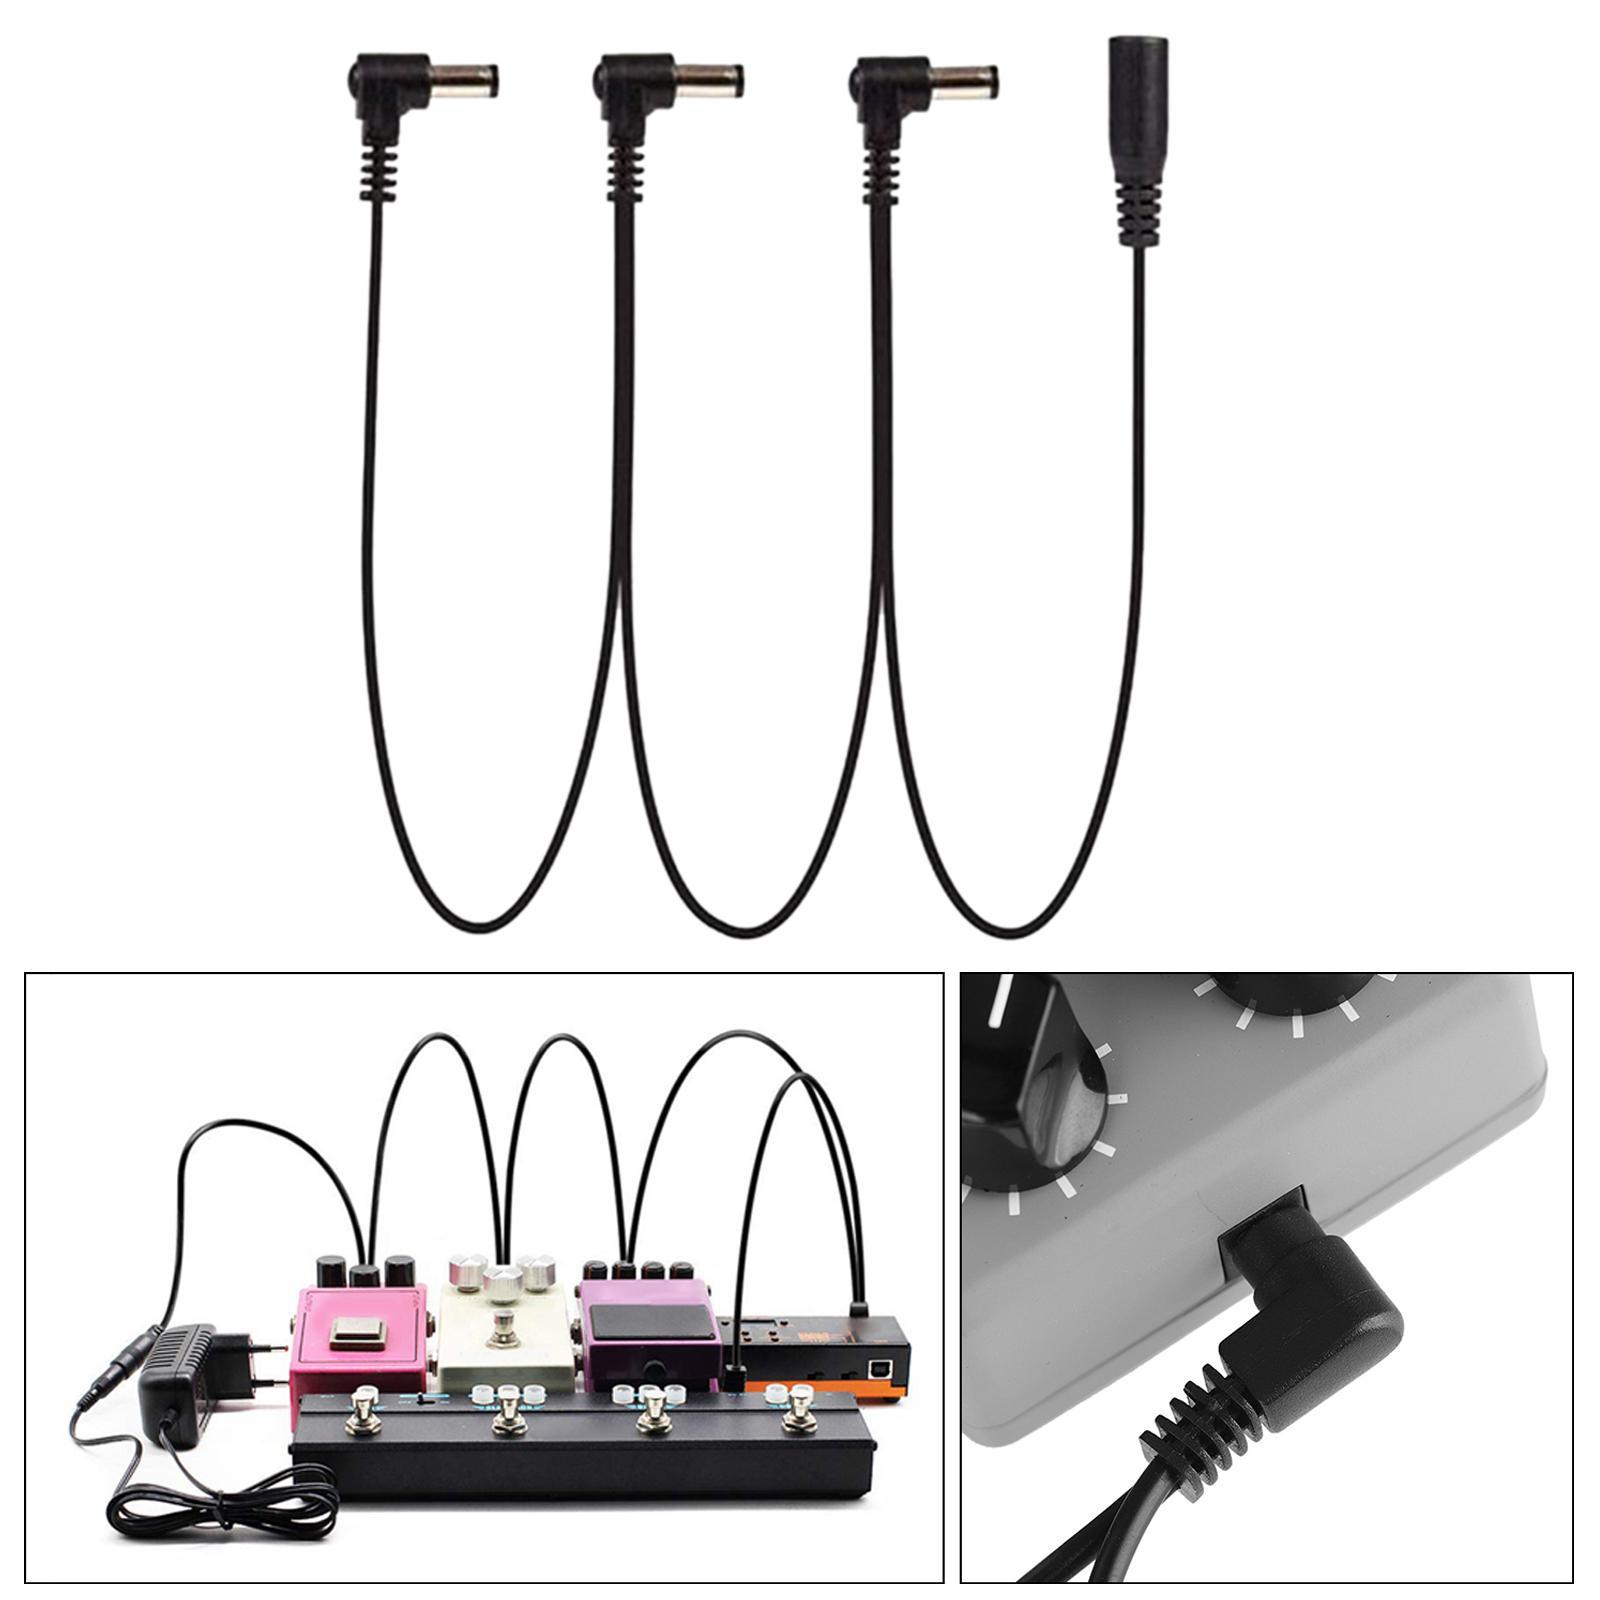 Daisy Chain Power Cable ,Electric Guitar Effect Pedal Cables Bass Patch Wire Cable Effector Power Cord for Speaker Systems, Keyboard Amplifier